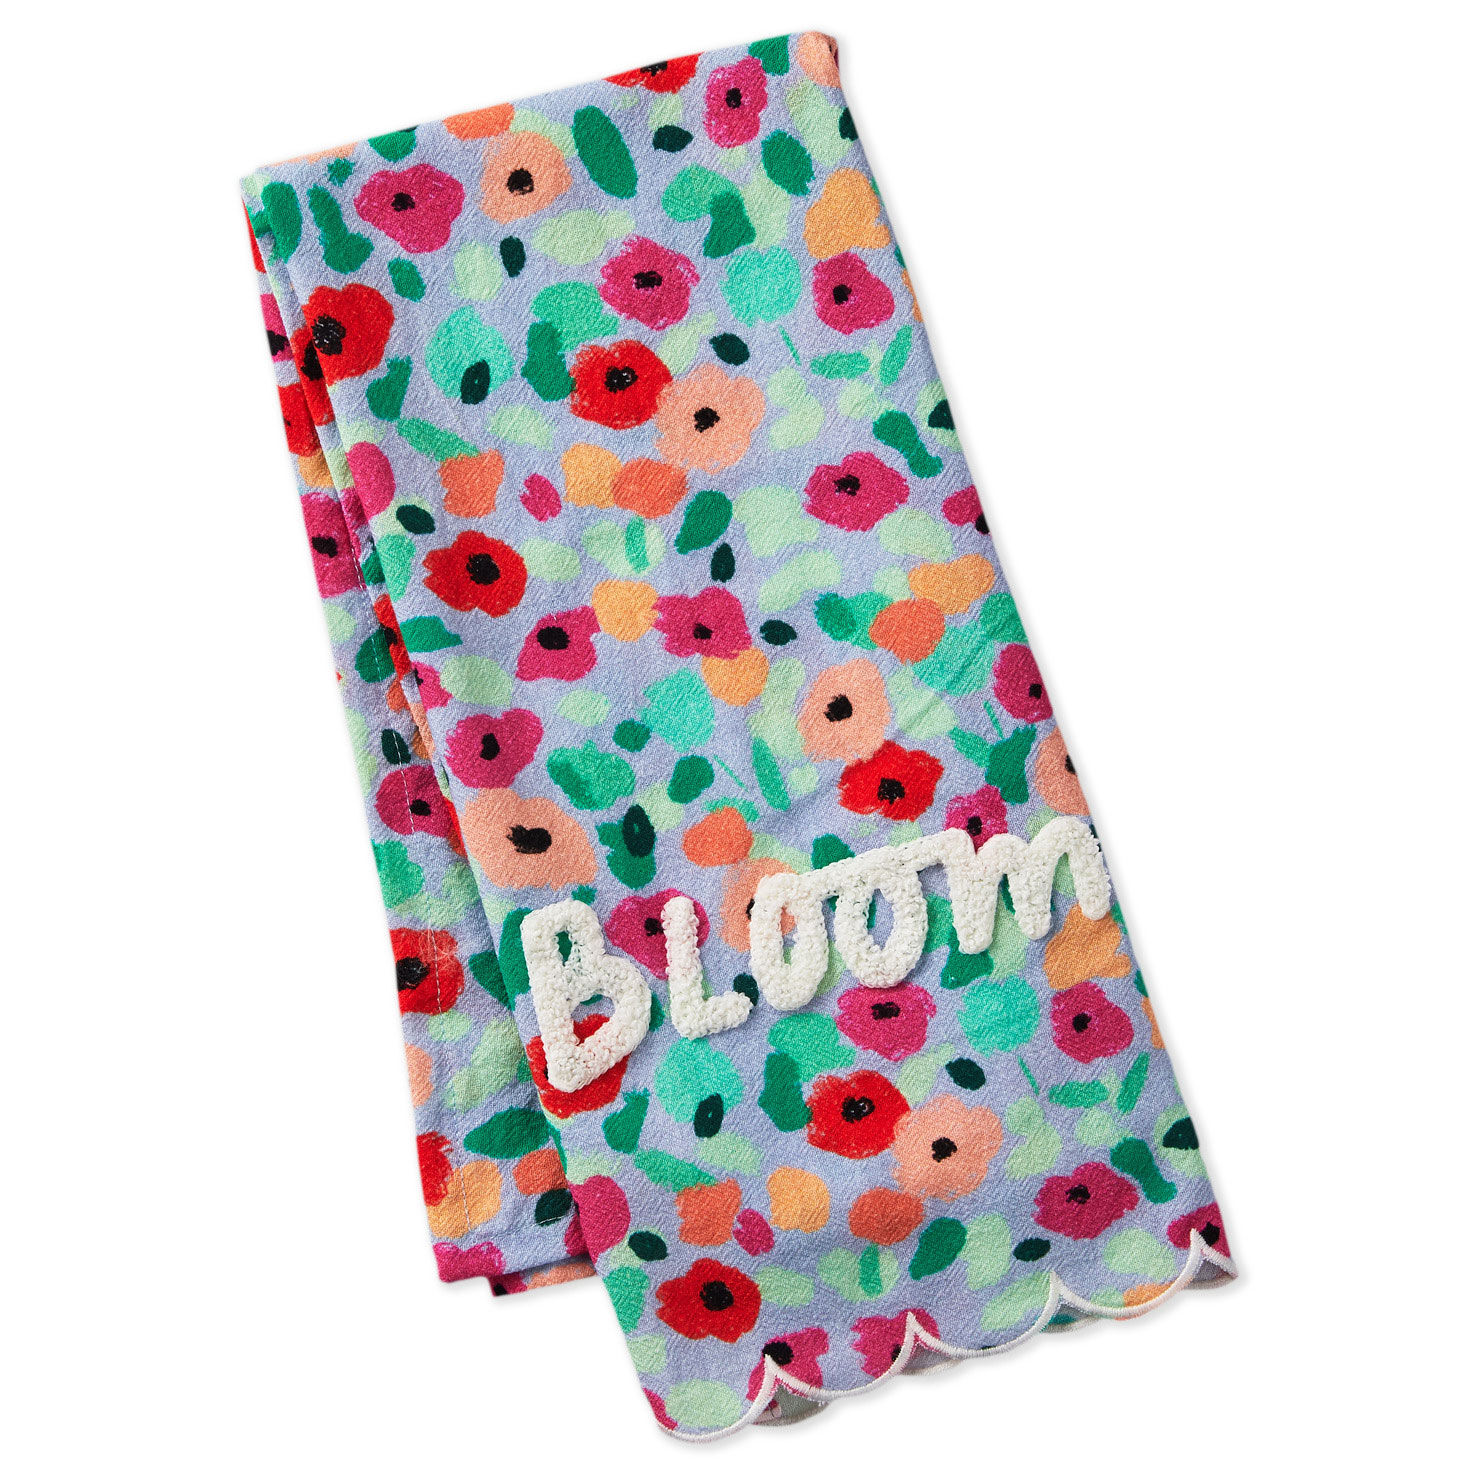 Bloom Abstract Floral Tea Towel for only USD 16.99 | Hallmark